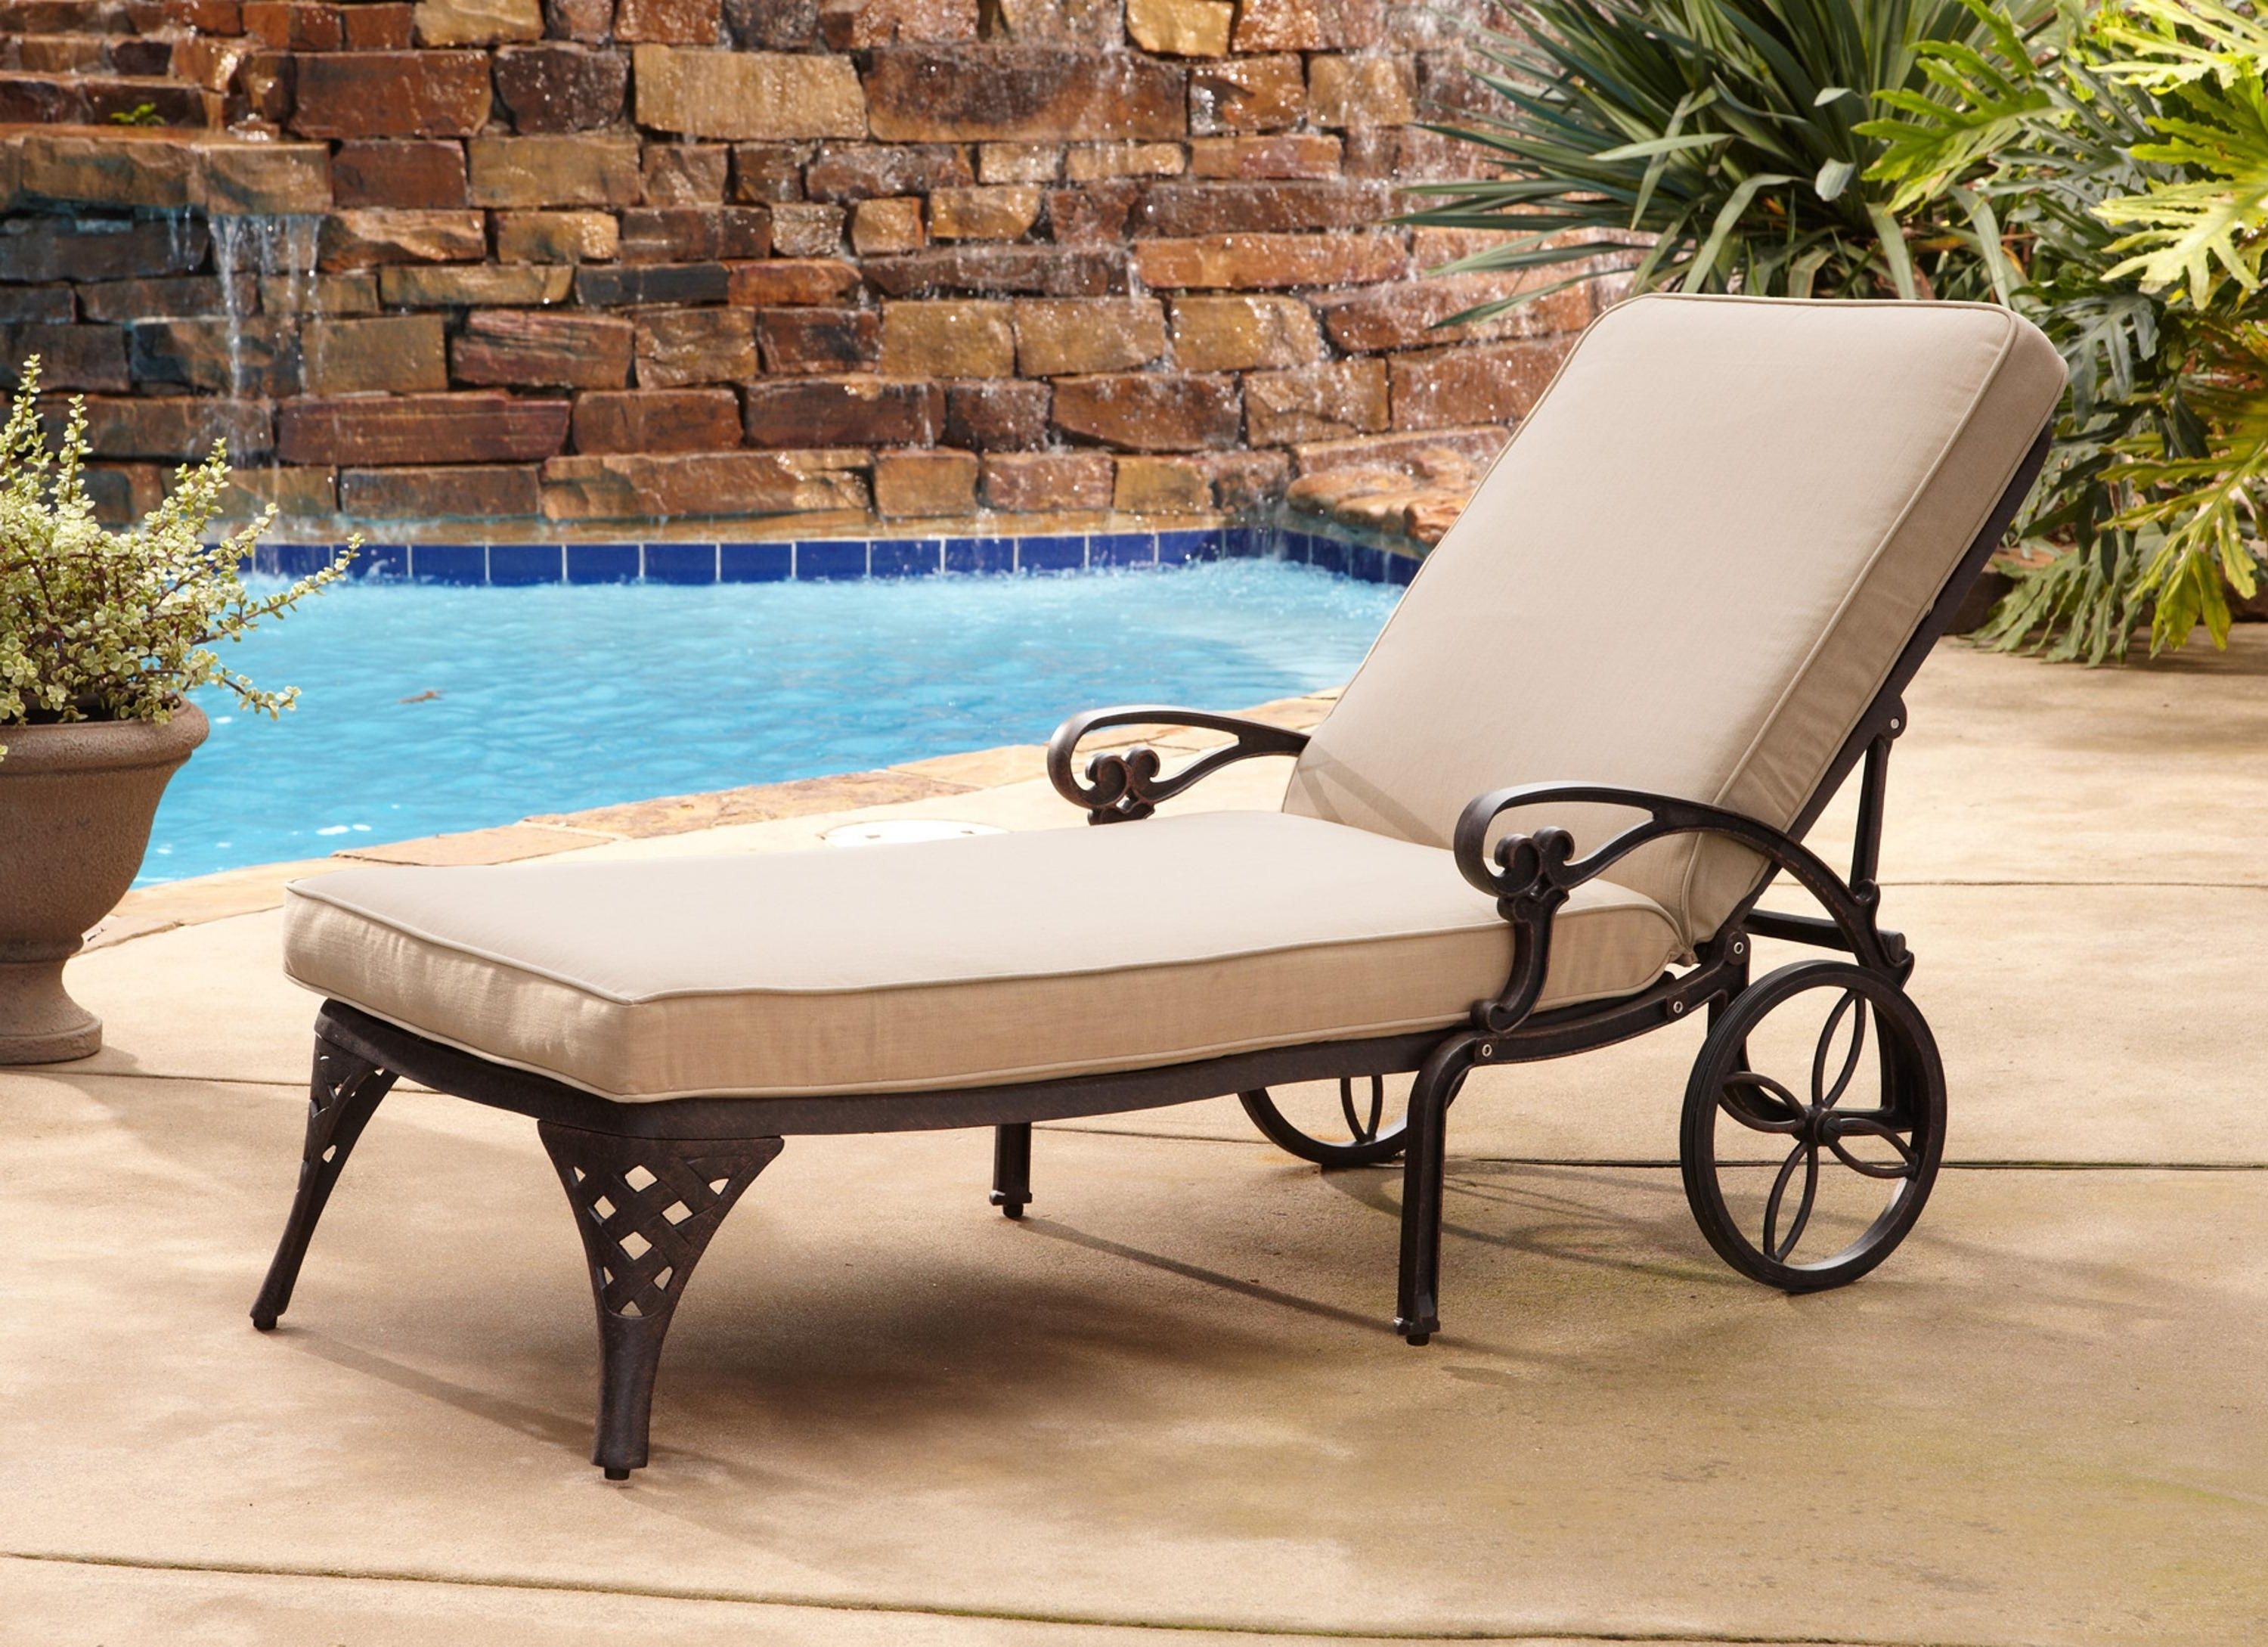 Chaise Lounge Chairs In Toronto With Latest Metal Chaise Lounge Chairs With Wheels • Lounge Chairs Ideas (View 13 of 15)